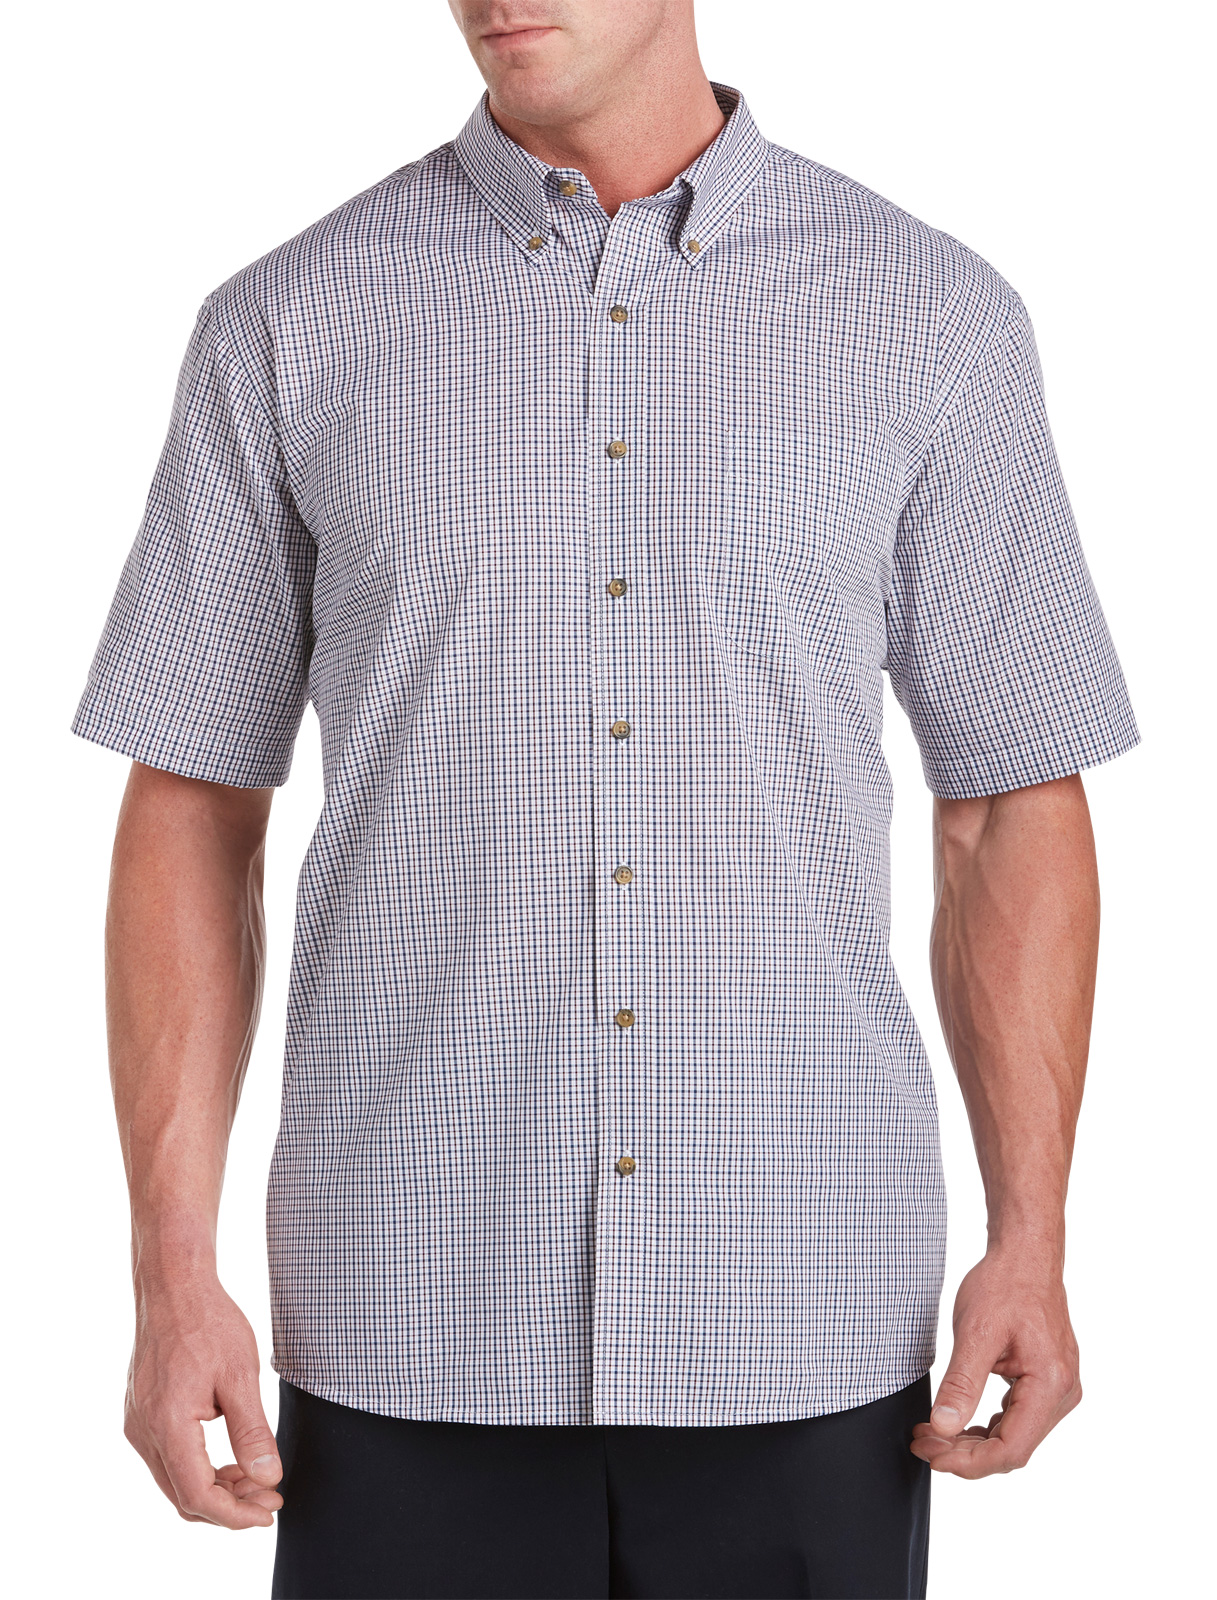 Harbor Bay Men's Big and Tall  Easy-Care Plaid Sport Shirt